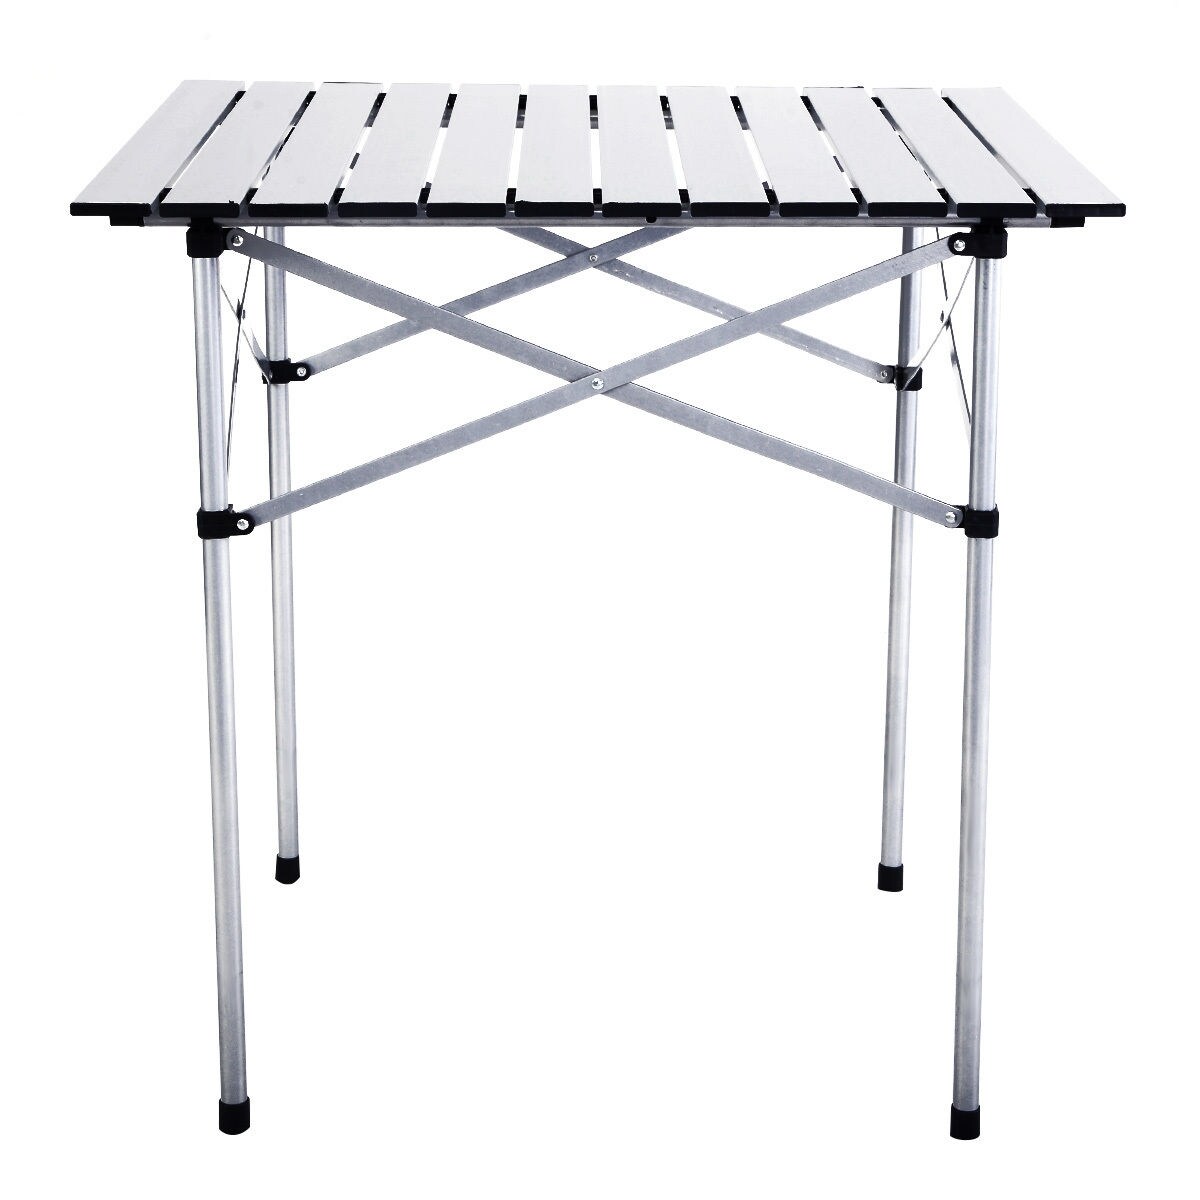 Lightweight Camping Table Aluminum Portable Folding Stand Compact Roll Up Tables 